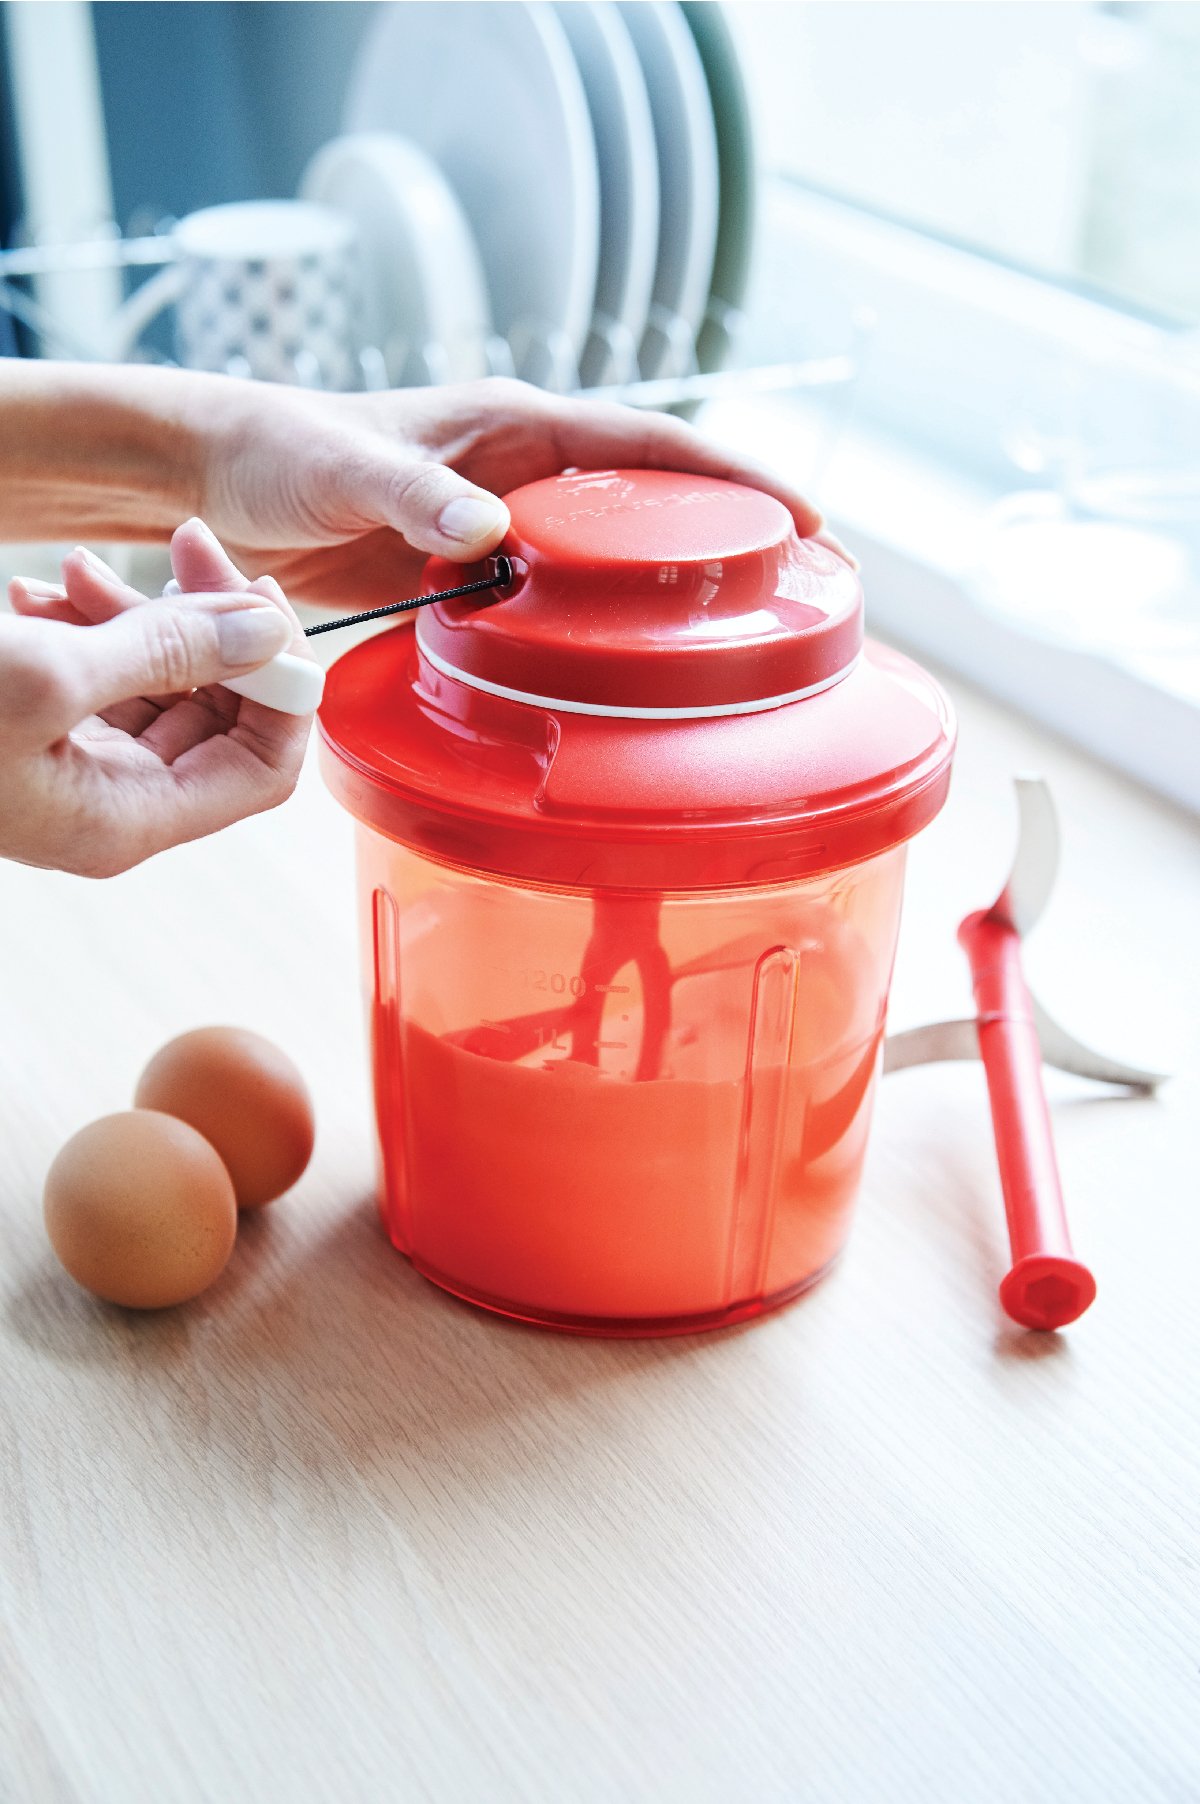 syndrom Vær forsigtig Arrowhead Tupperware Brands on Twitter: "No plug, no problem! Whisk and whip with our  eco-friendly, easy to use Extra Chef. #Tupperware https://t.co/0hTQDbmnQA"  / Twitter